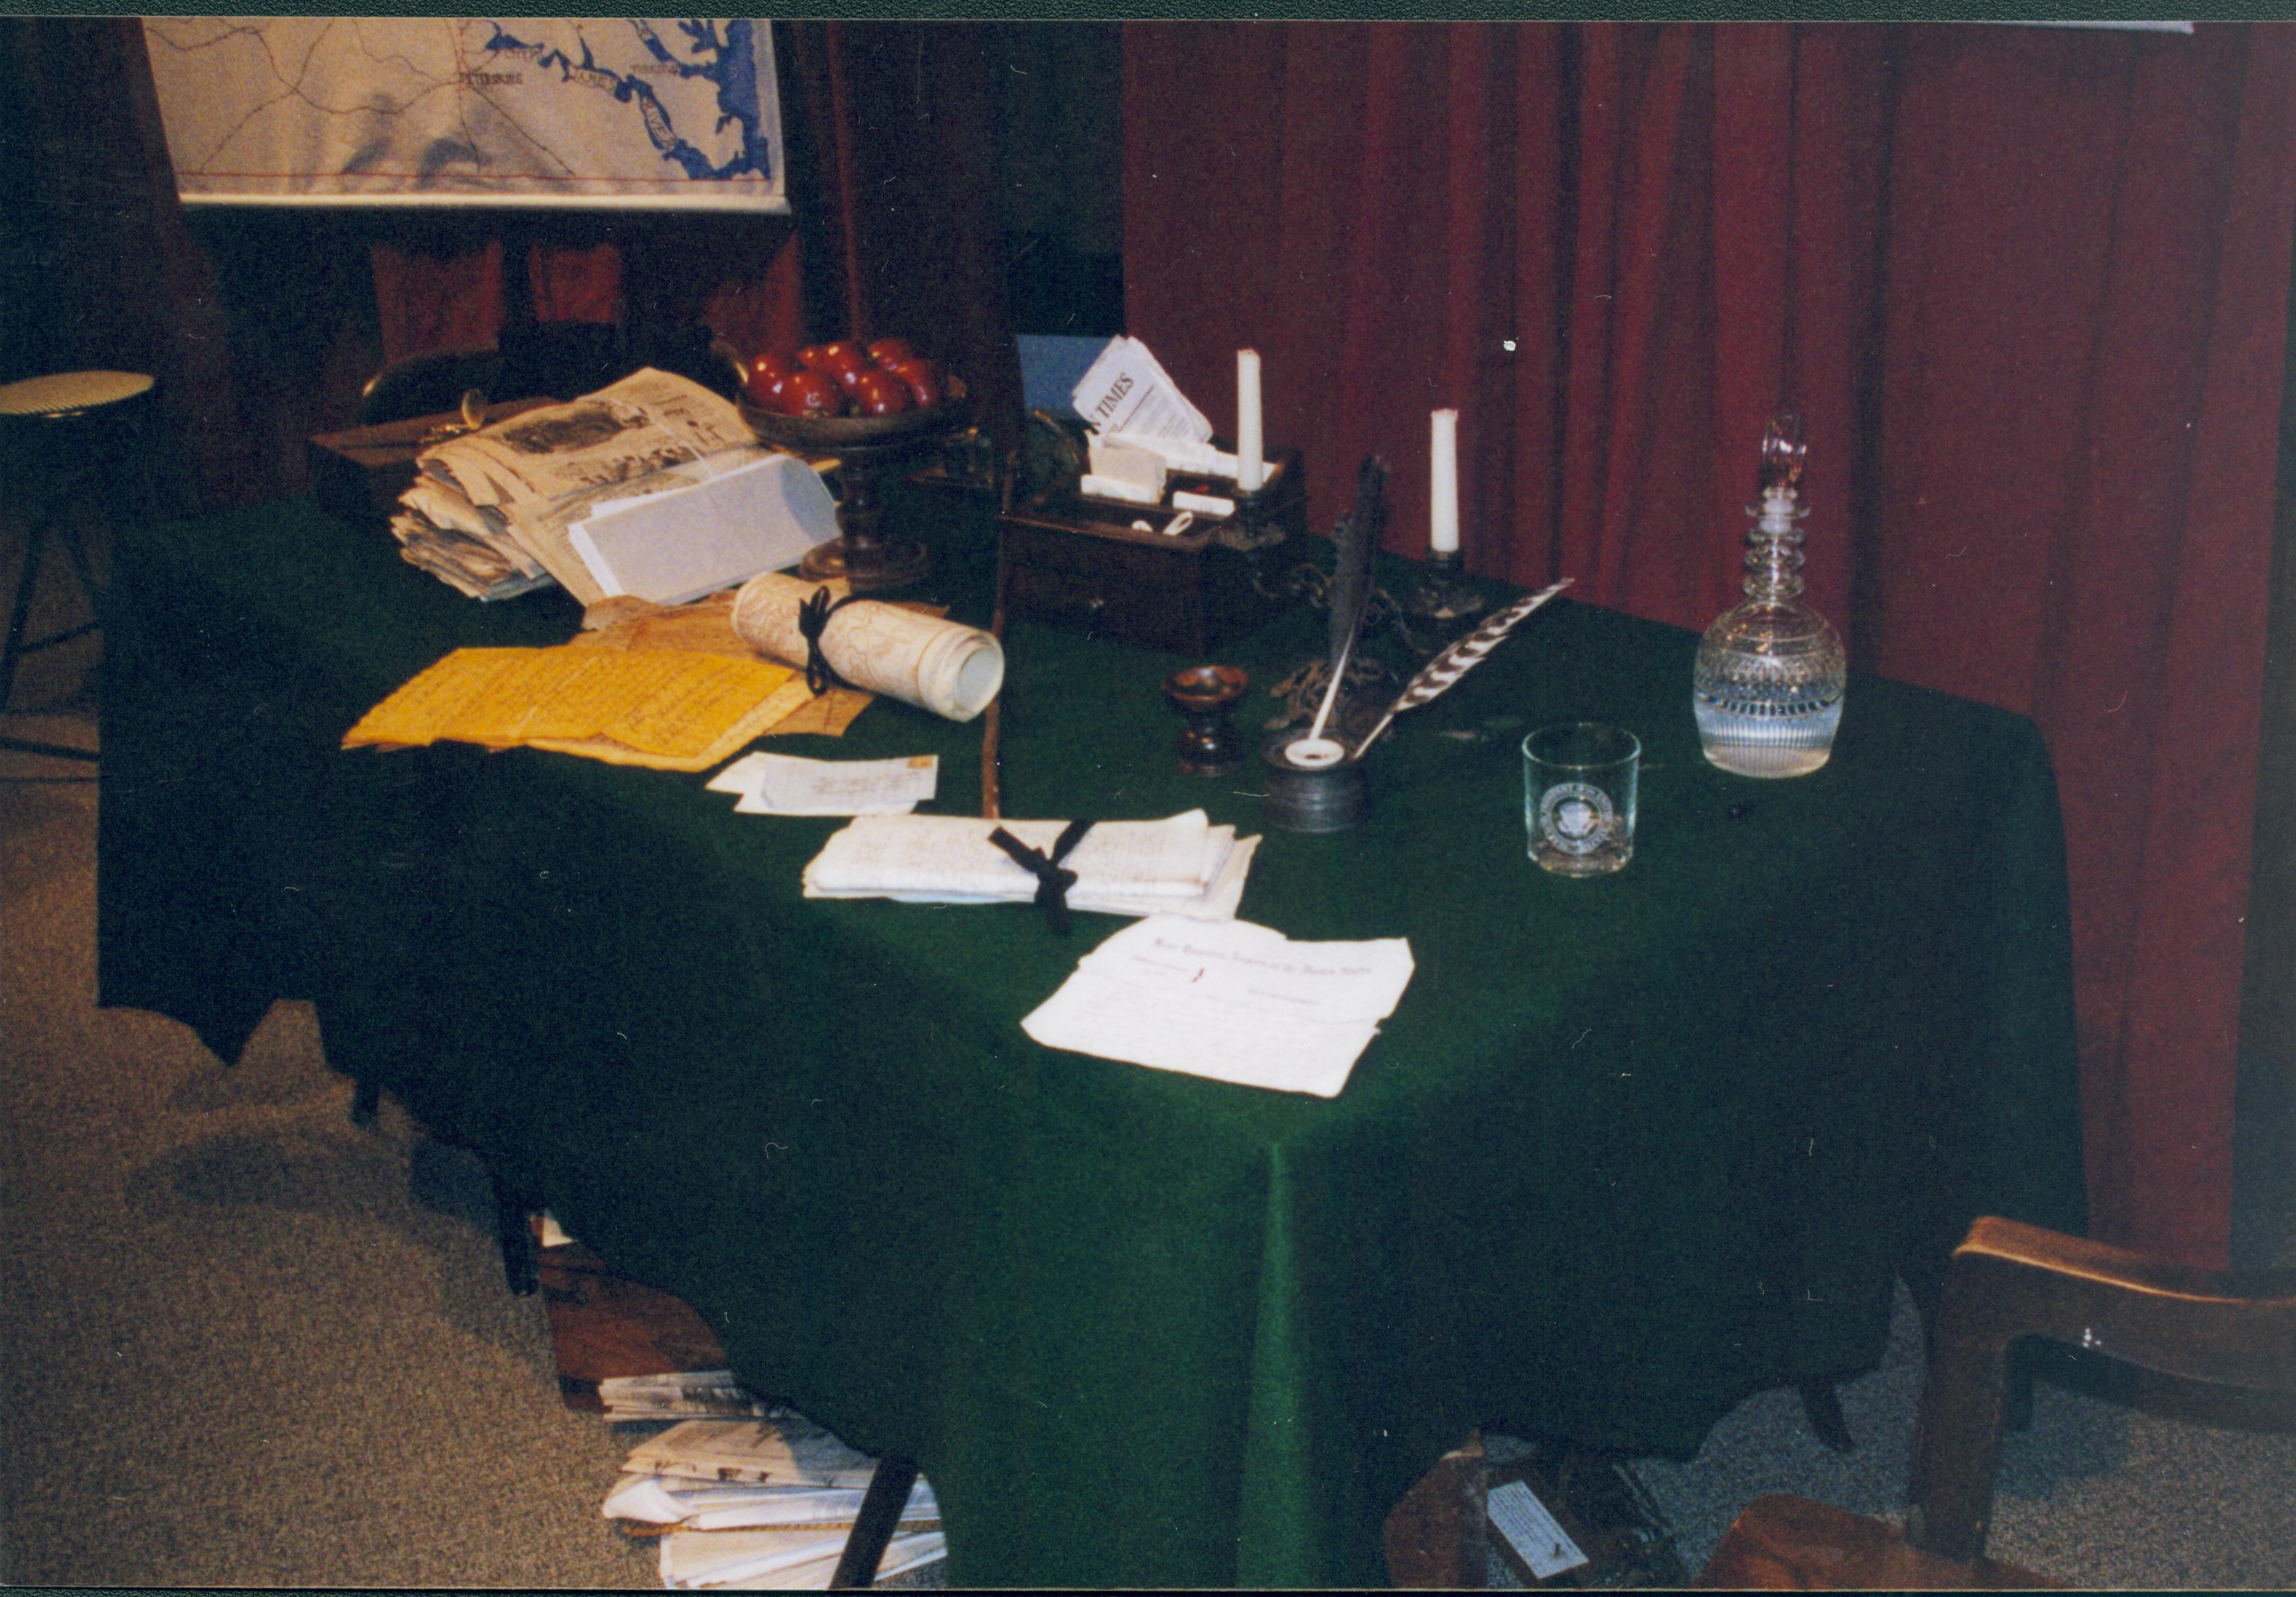 Table set up for program Lincoln Home NHS- Fritz Klein and Drew Gibson visit, roll 2002-1, exp 6 Klein, Gibson, visit